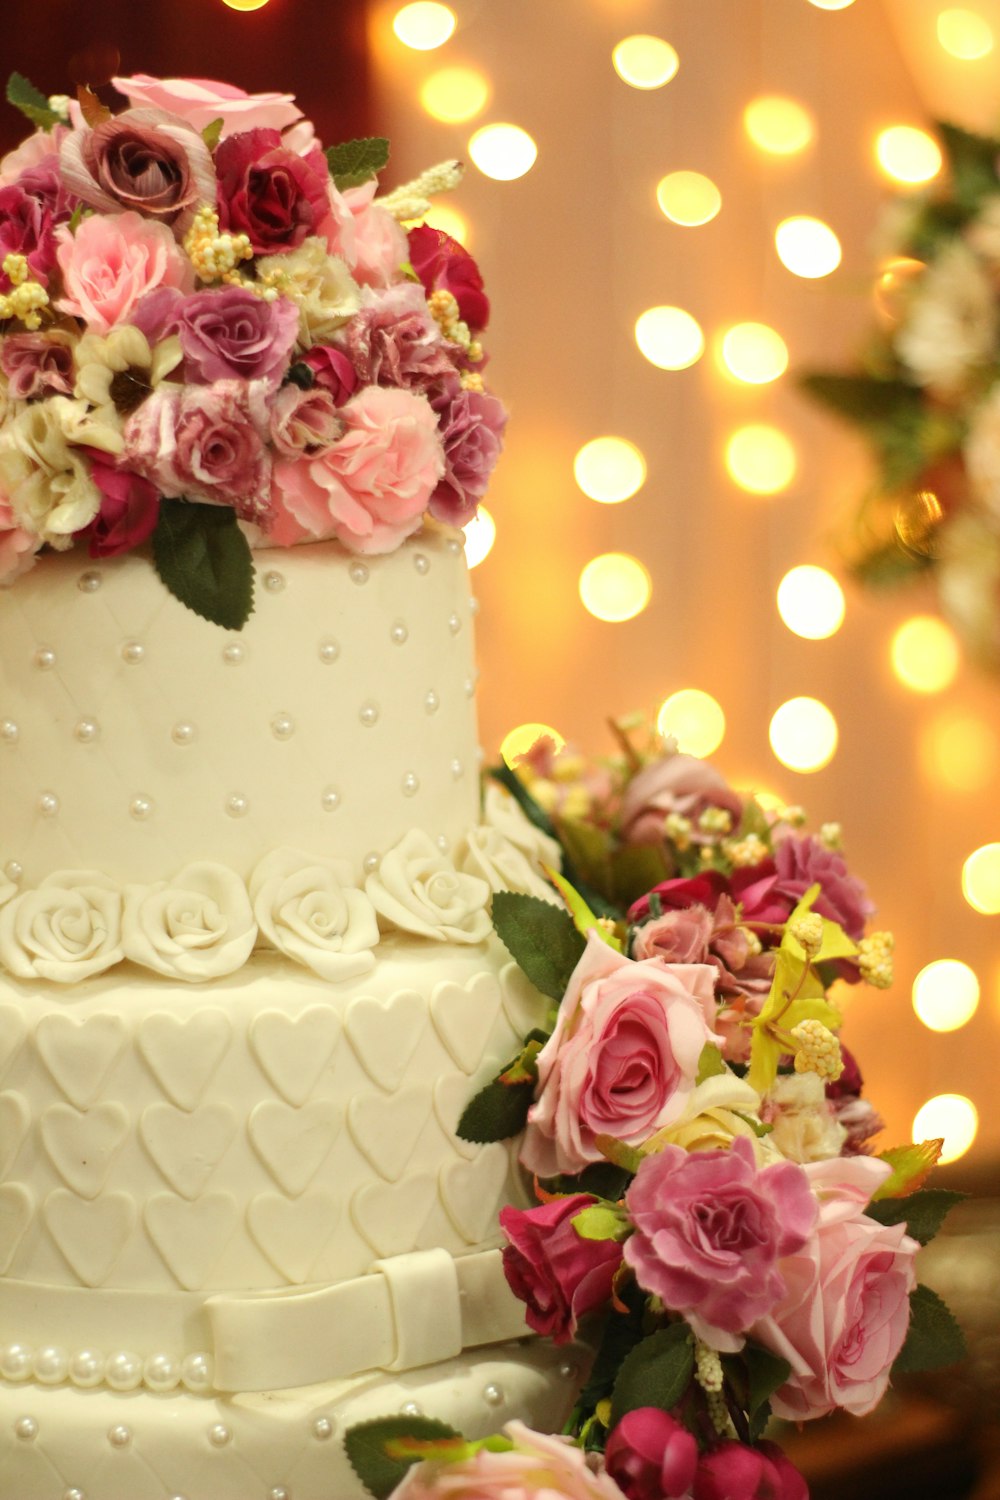 a wedding cake with pink and white flowers on top